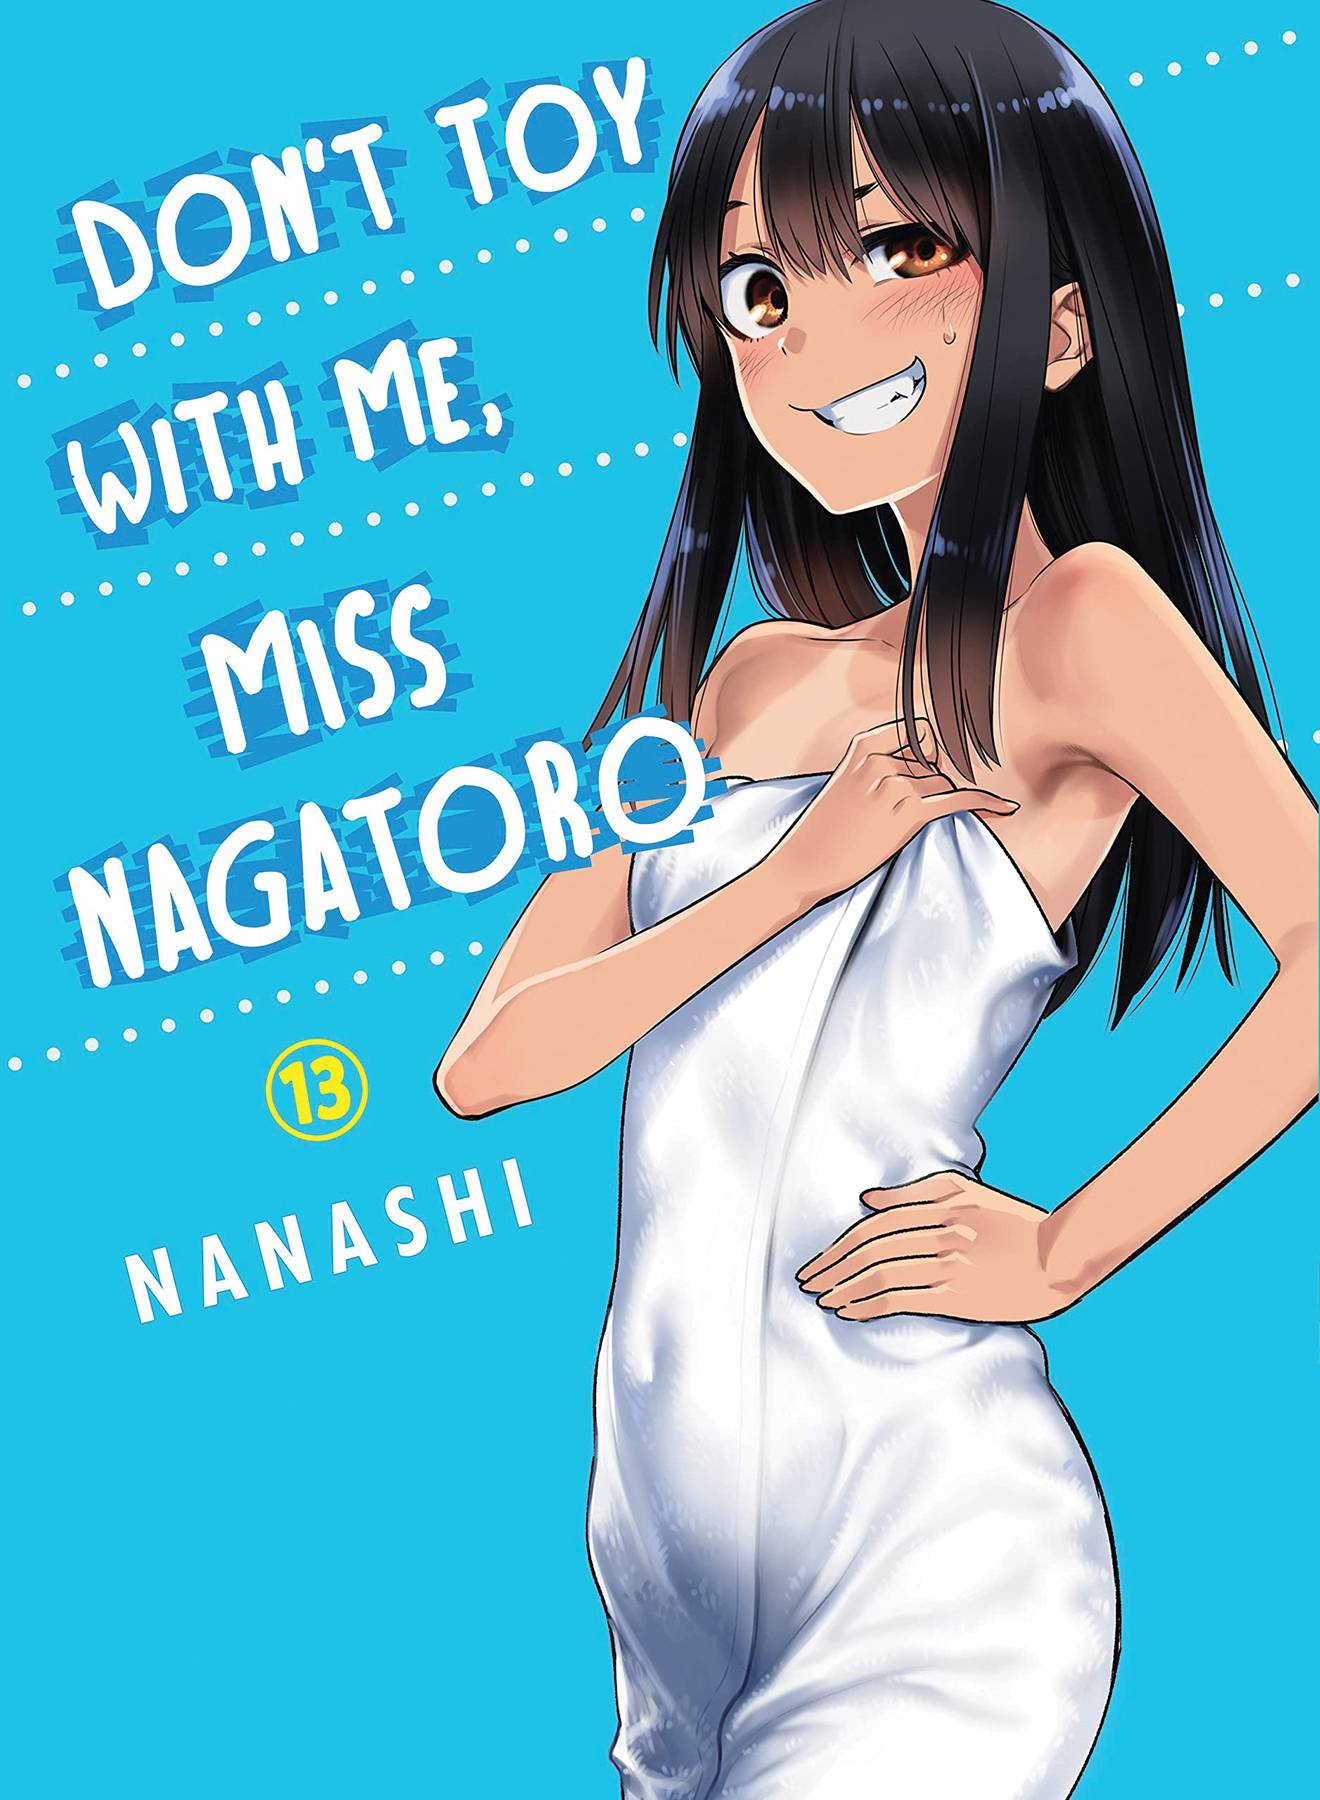 The One Stop Shop Comics & Games Dont Toy With Me Miss Nagatoro Gn Vol 14 (C: 0-1-1) (4/5/2023) VERTICAL COMICS